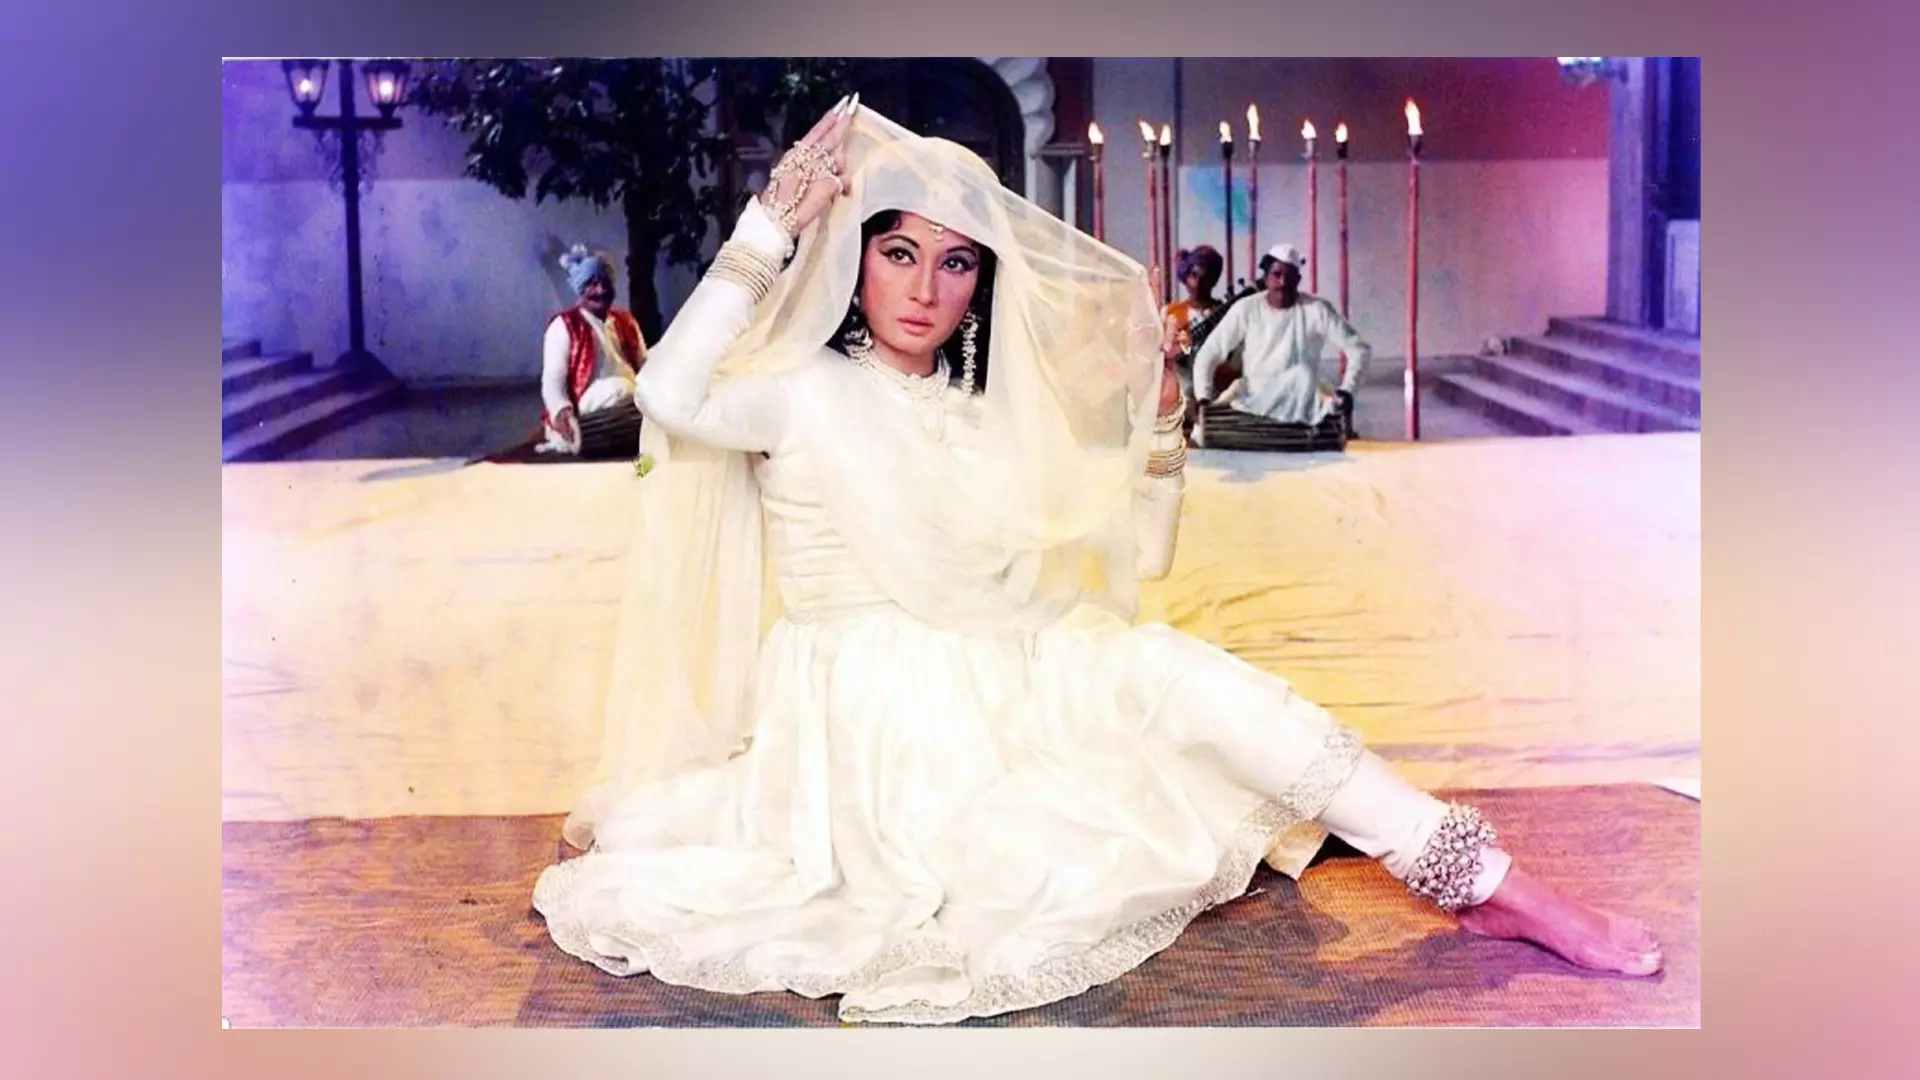 Pakeezah set a template. In the 1980s, filmmakers started taking a more nuanced approach and presenting them as multifaceted characters with rich inner lives.